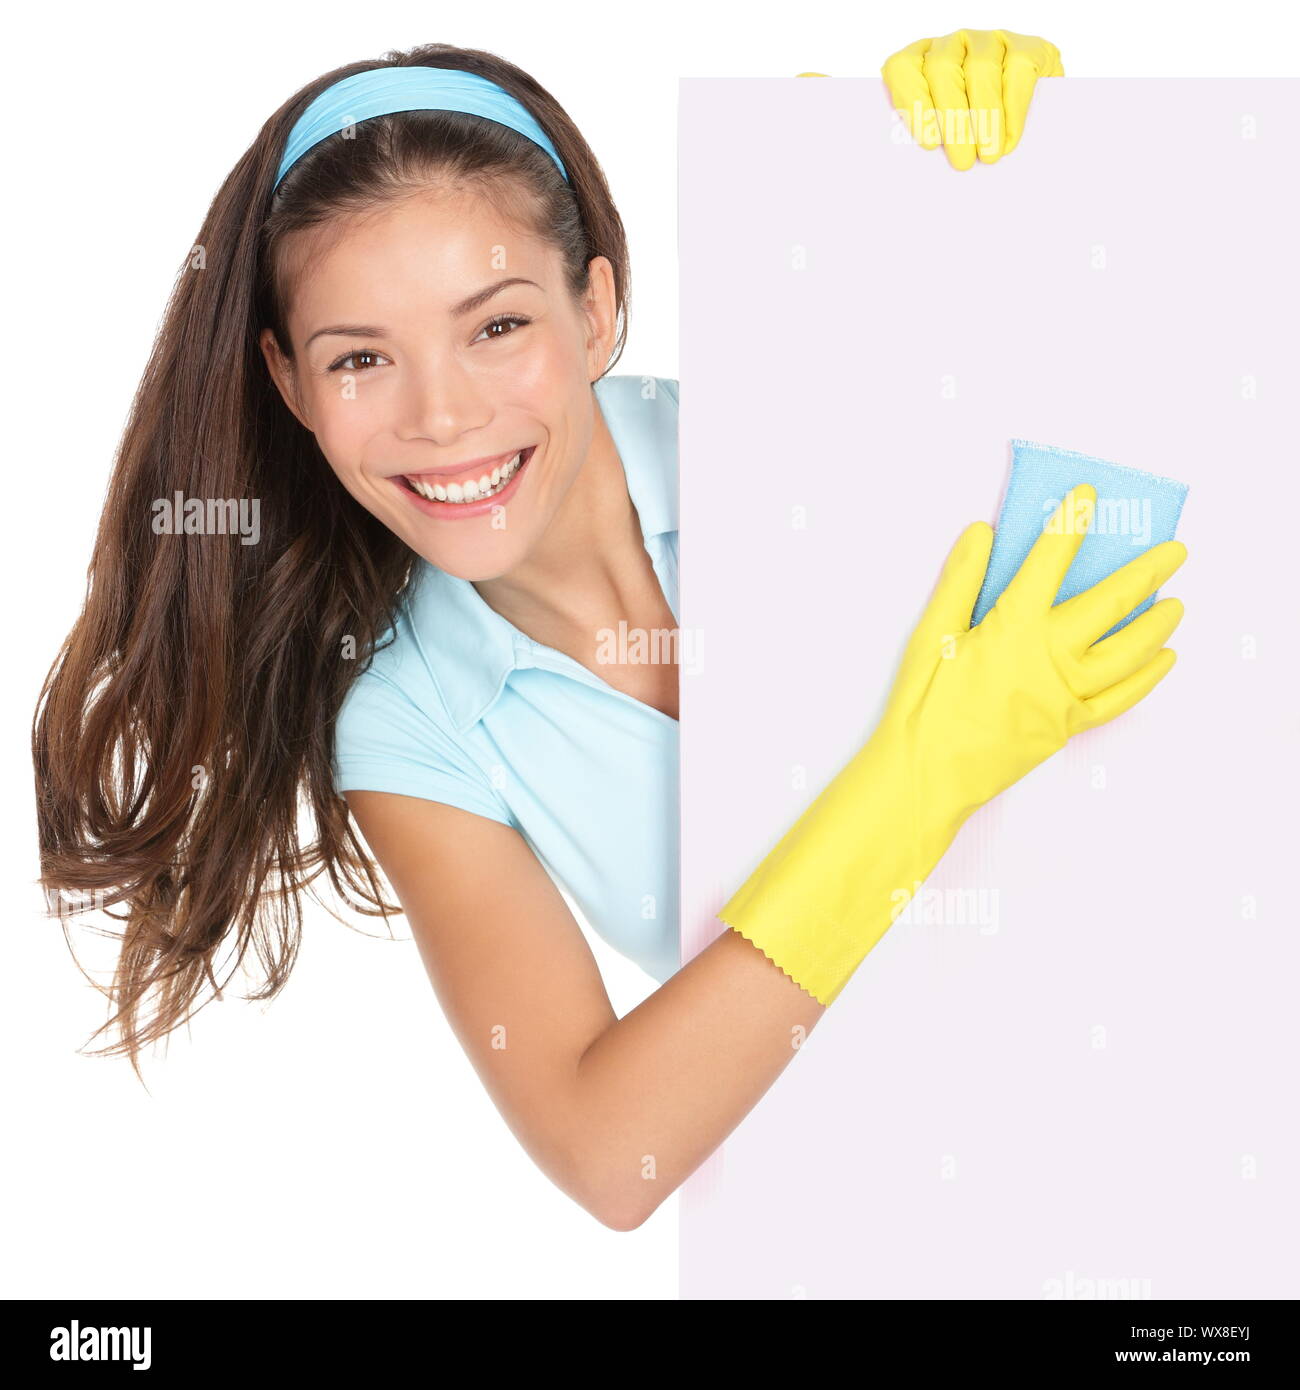 Cleaning woman showing sign Stock Photo